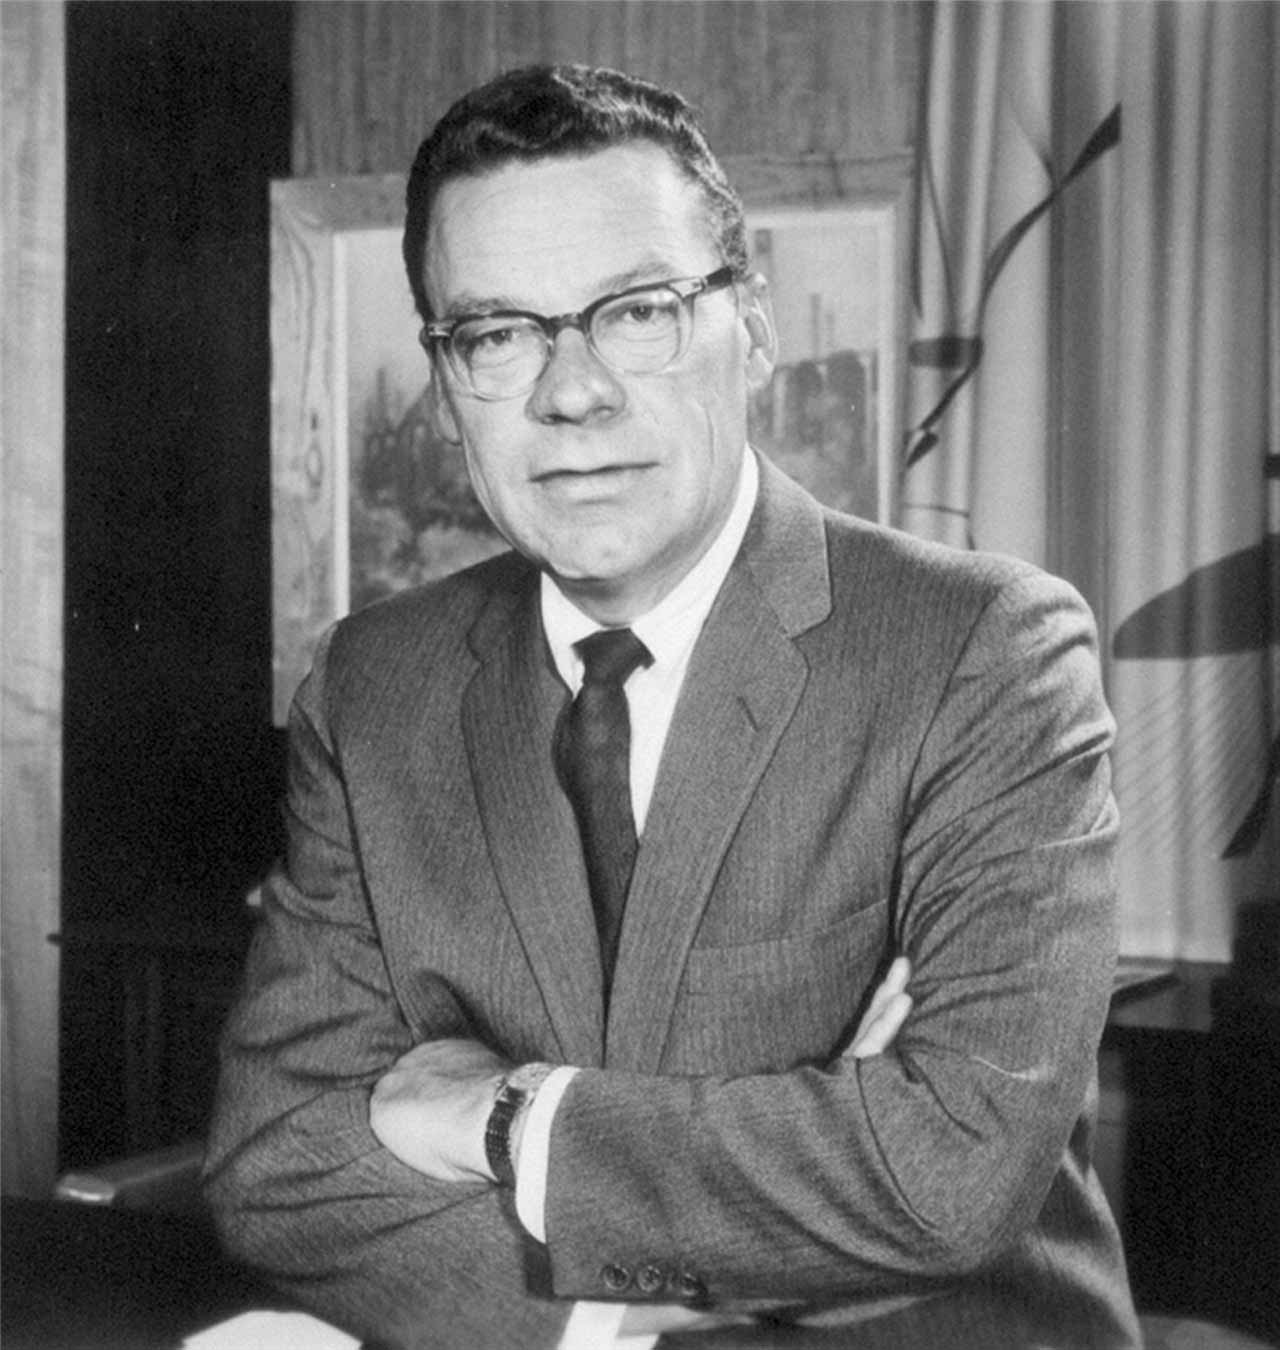 Black and white photo of the Master and Dean of Personal Development, Earl Nightingale